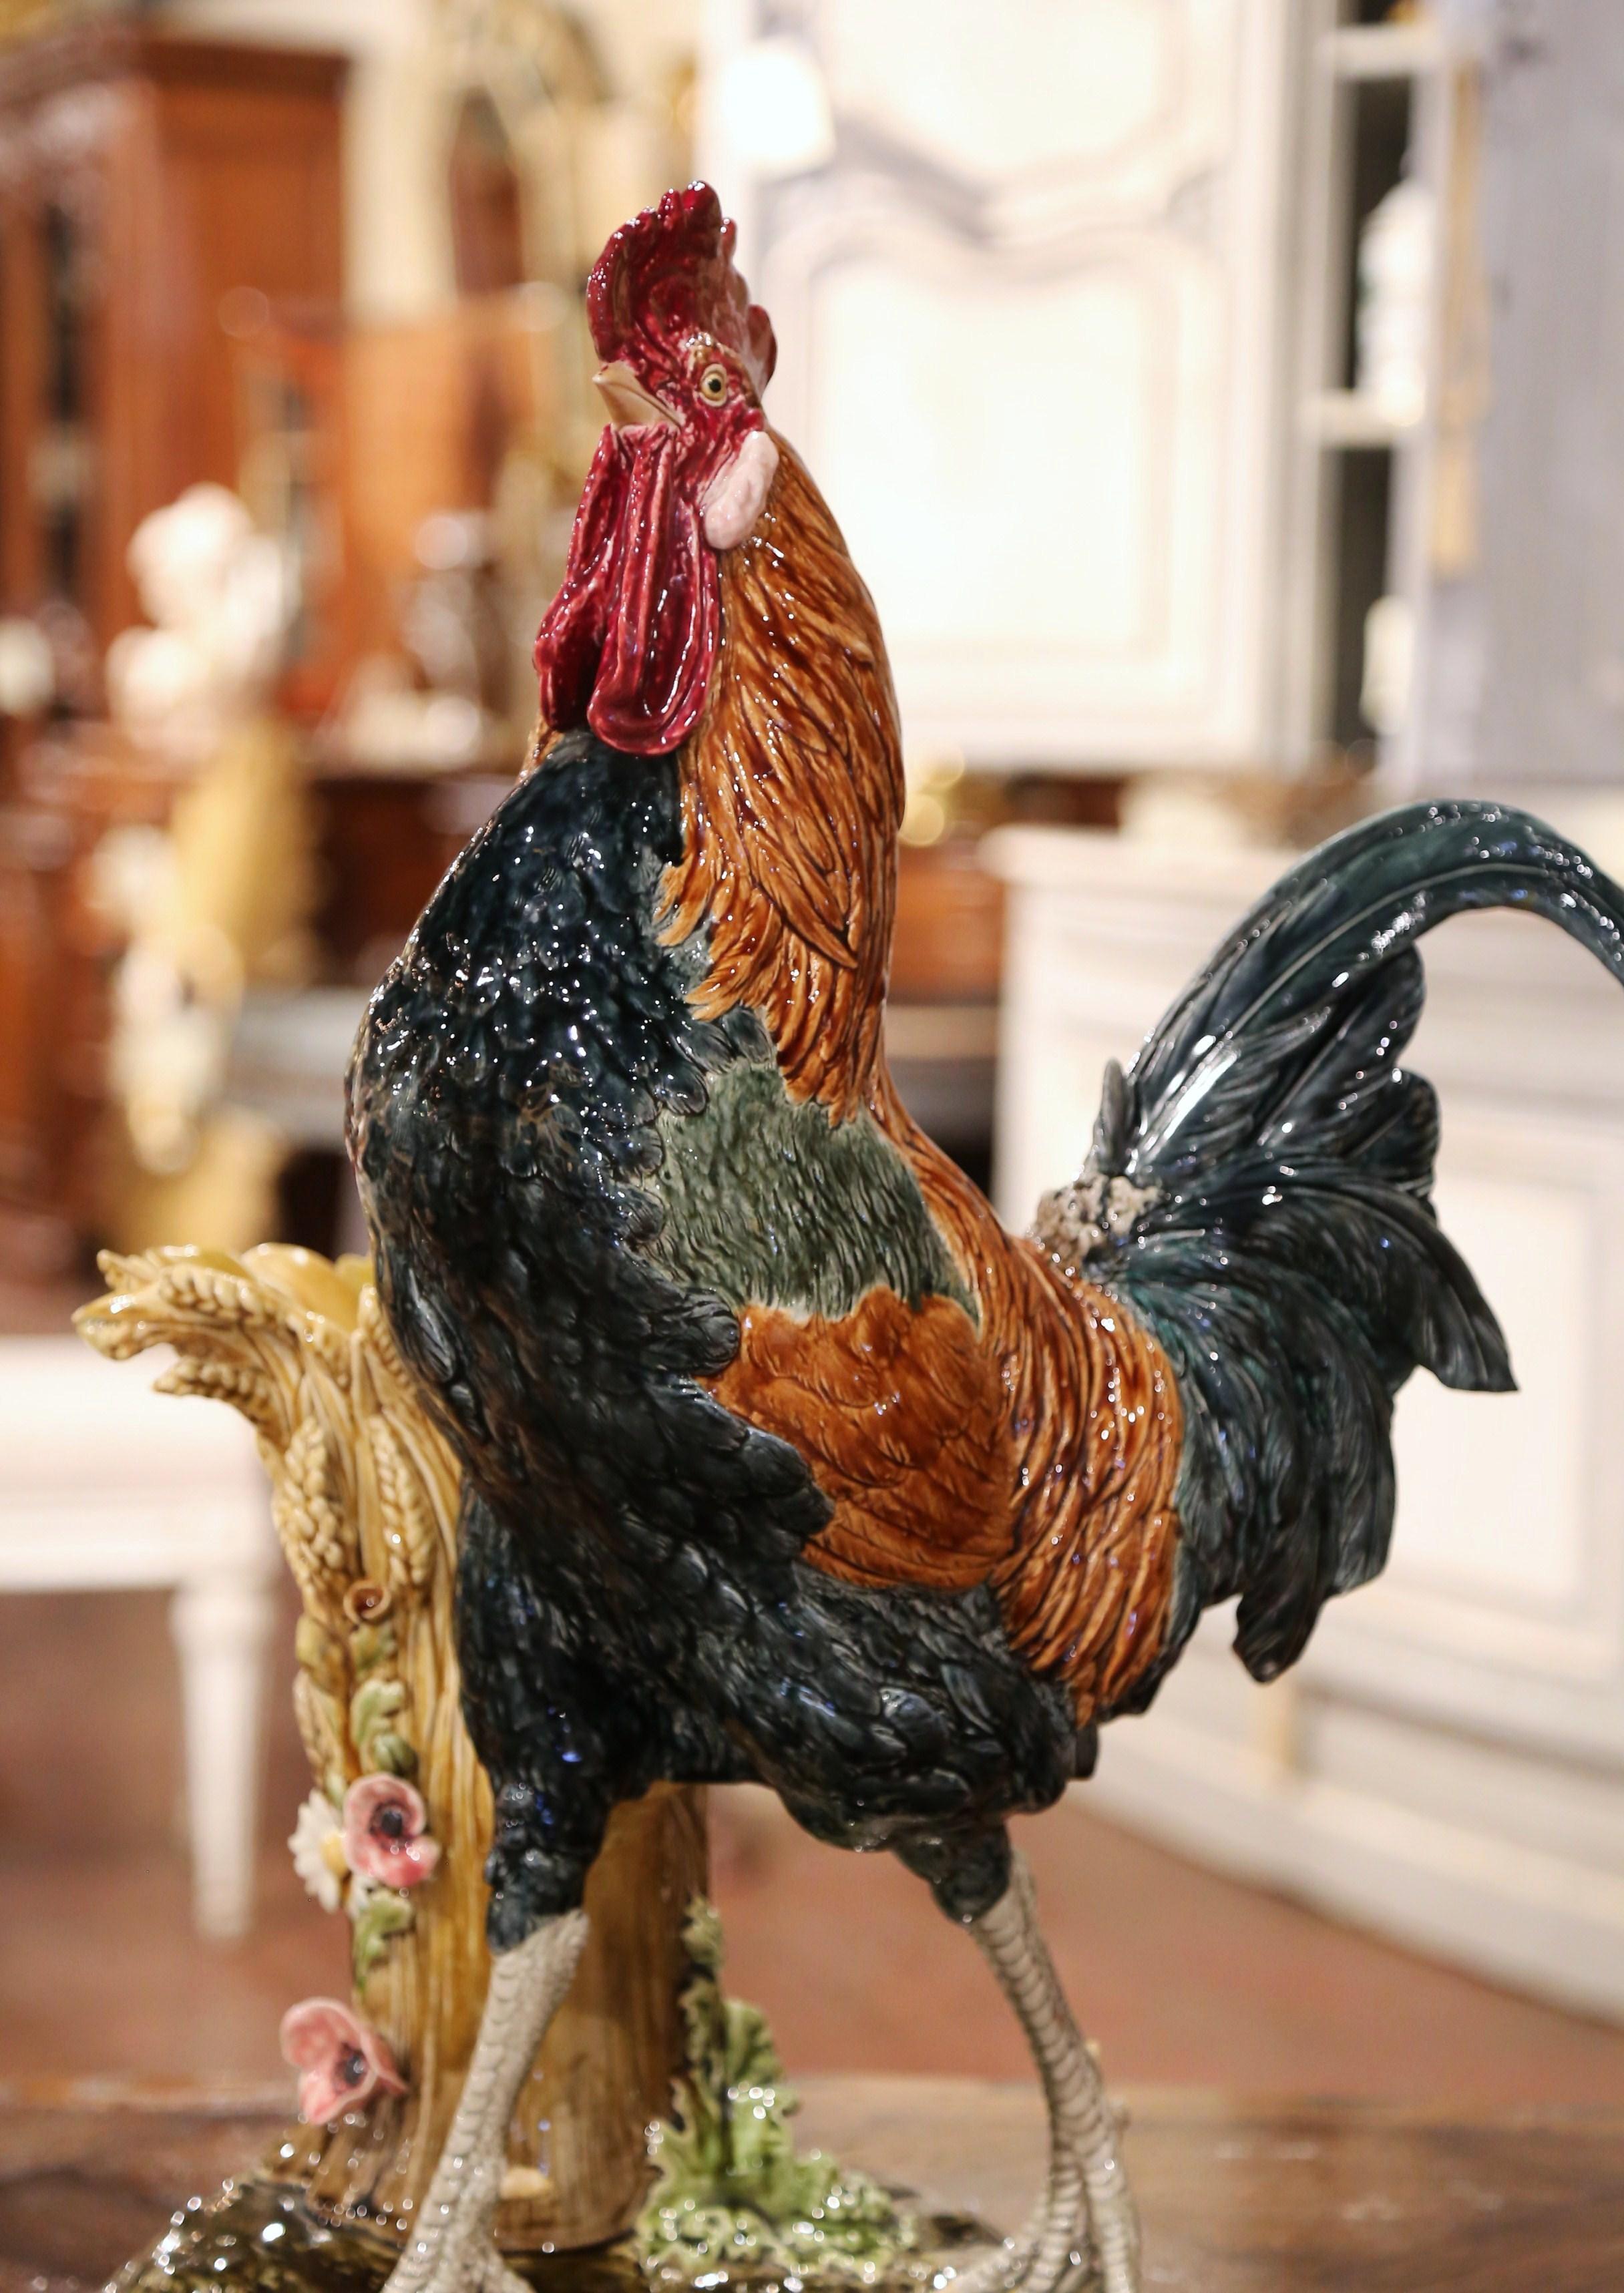 Add the charm of the French countryside to your home with this large, colorful and rare ceramic rooster sculpture. Crafted in France circa 1880, the Majolica composition is at once a flower vase and a rooster sculpture. The elegant faience piece